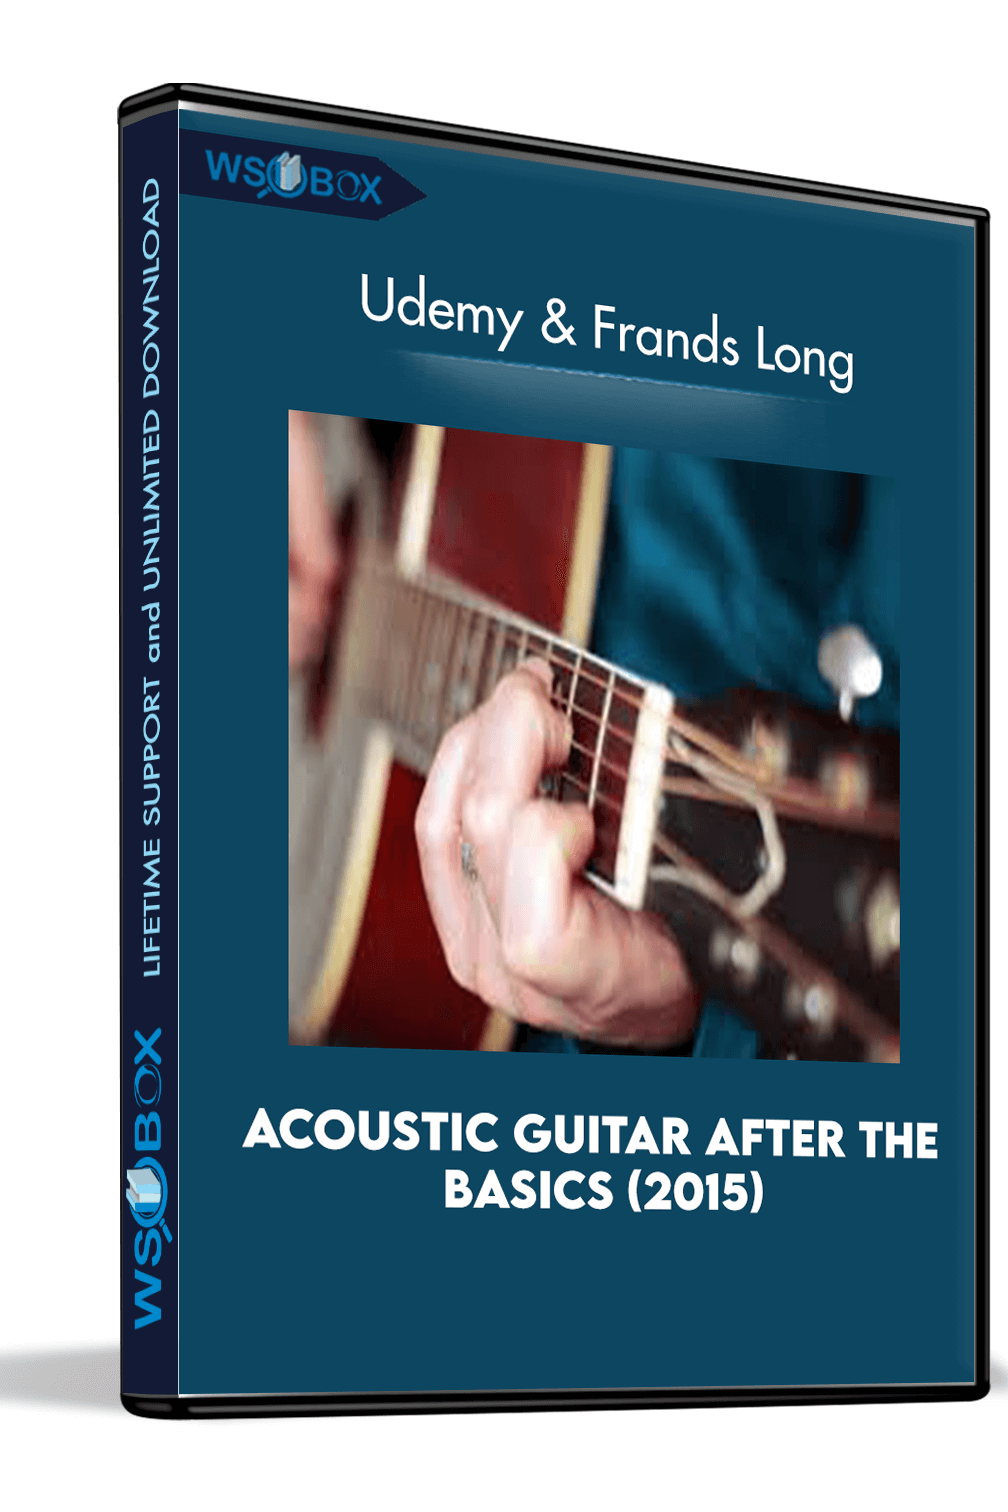 acoustic-guitar-after-the-basics-2015-udemy-and-frands-long